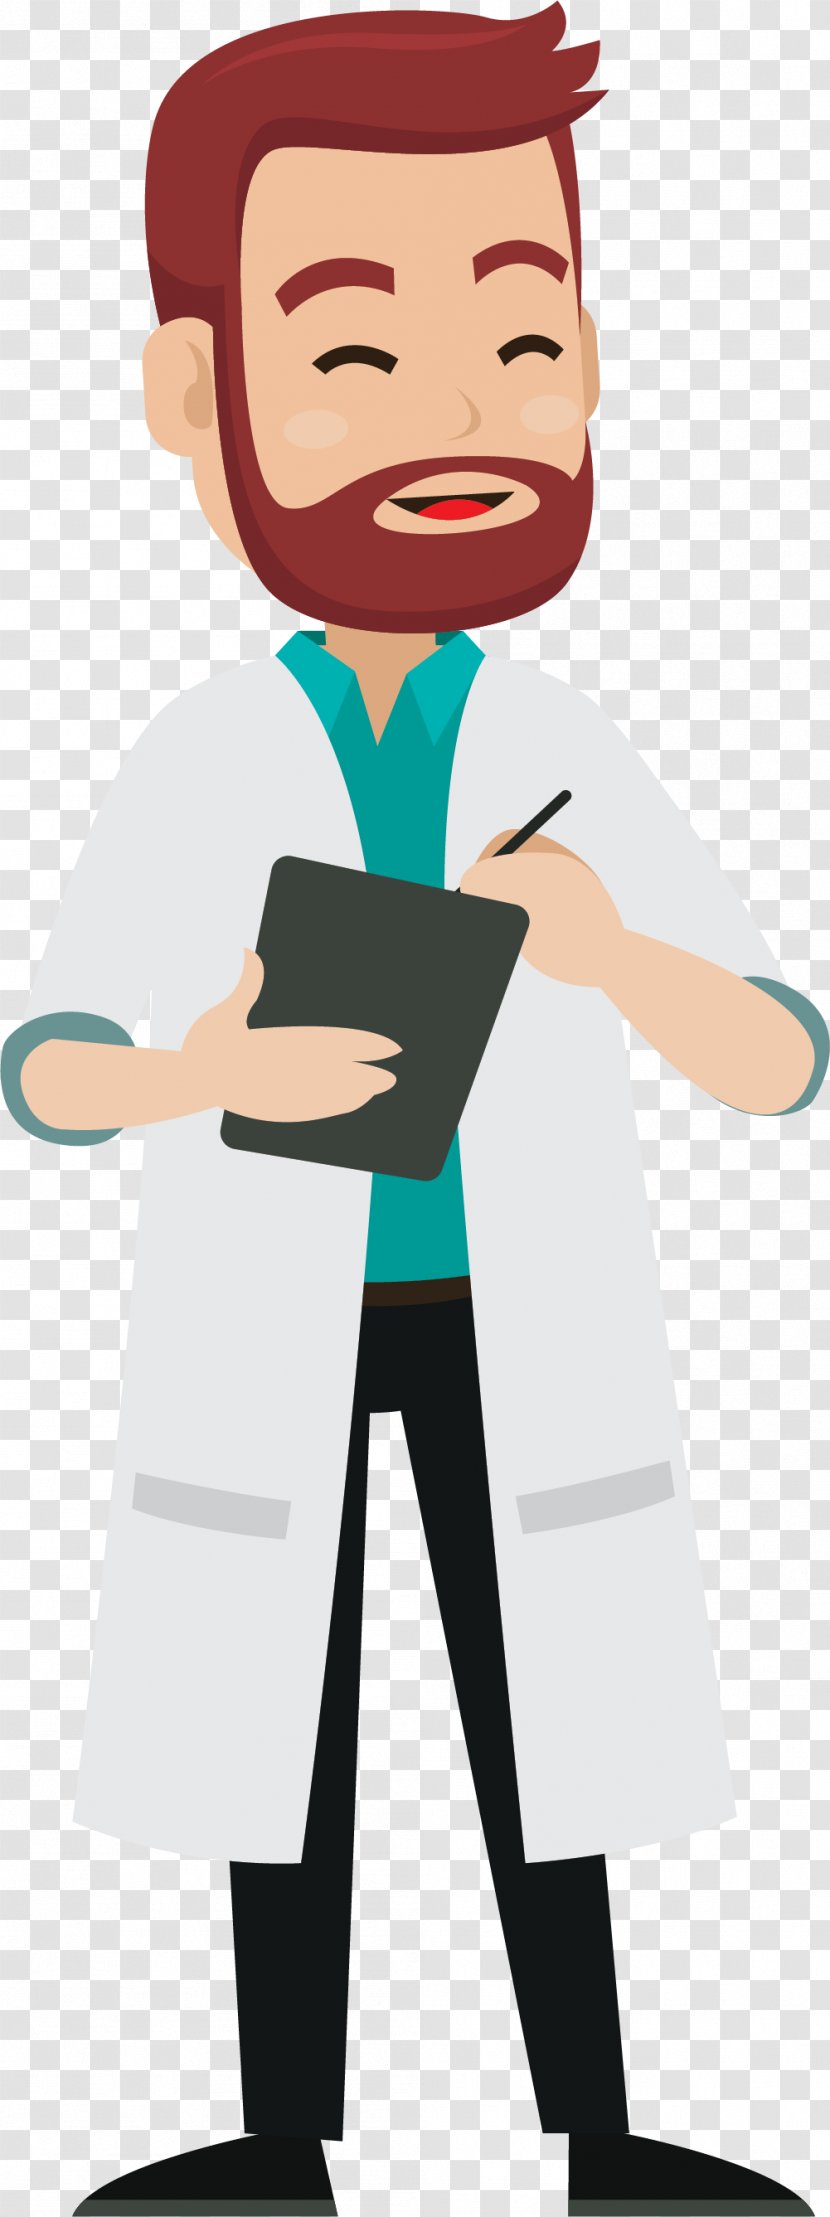 Physician Cartoon Illustration - Silhouette - Male Doctor Transparent PNG